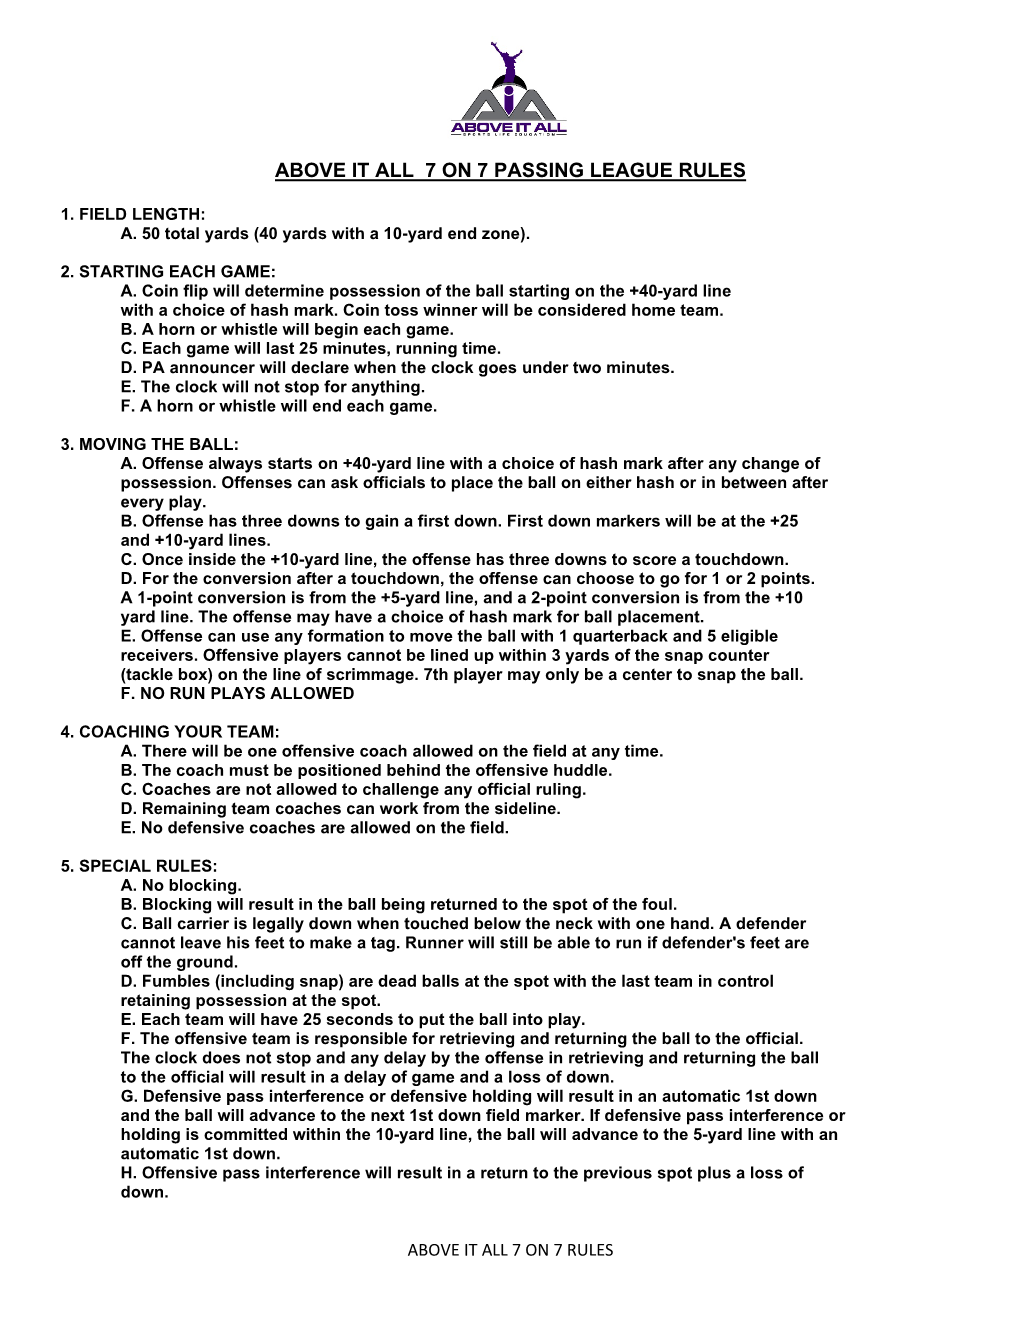 Above It All 7 on 7 Passing League Rules